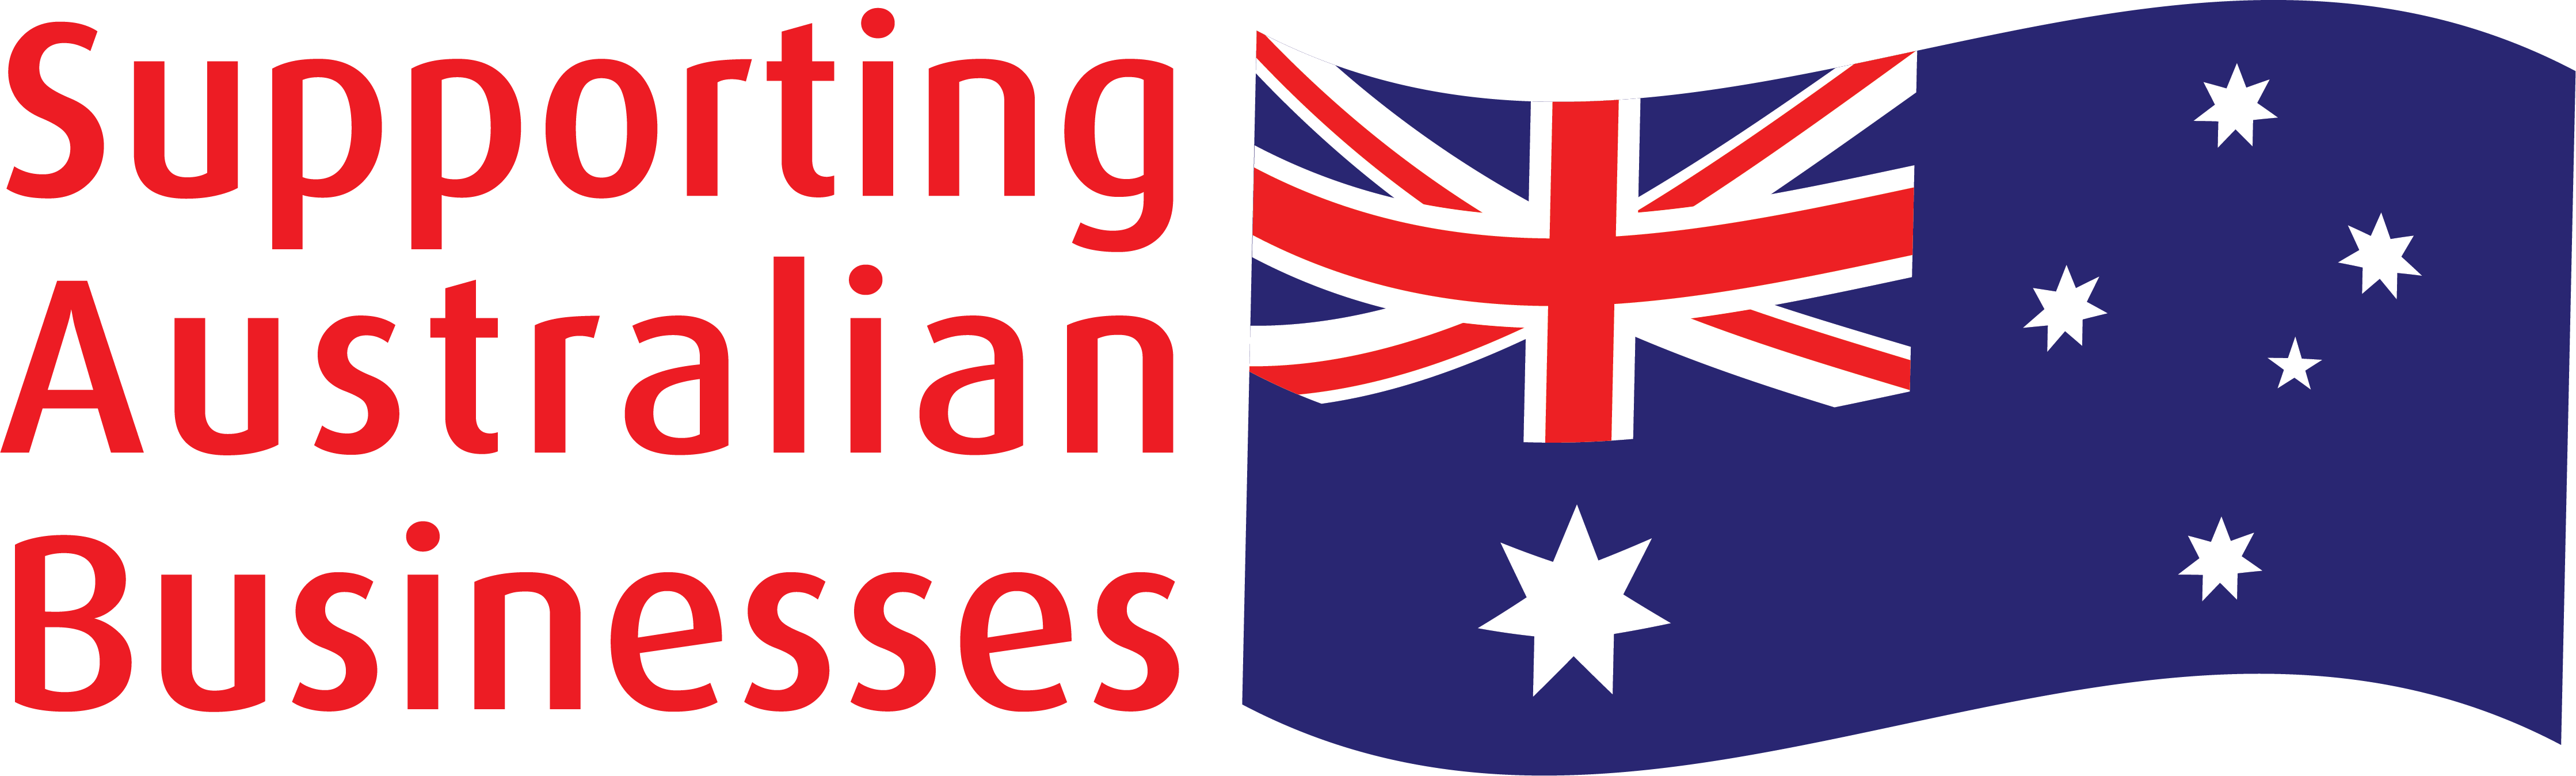 Supporting Australian Businesses